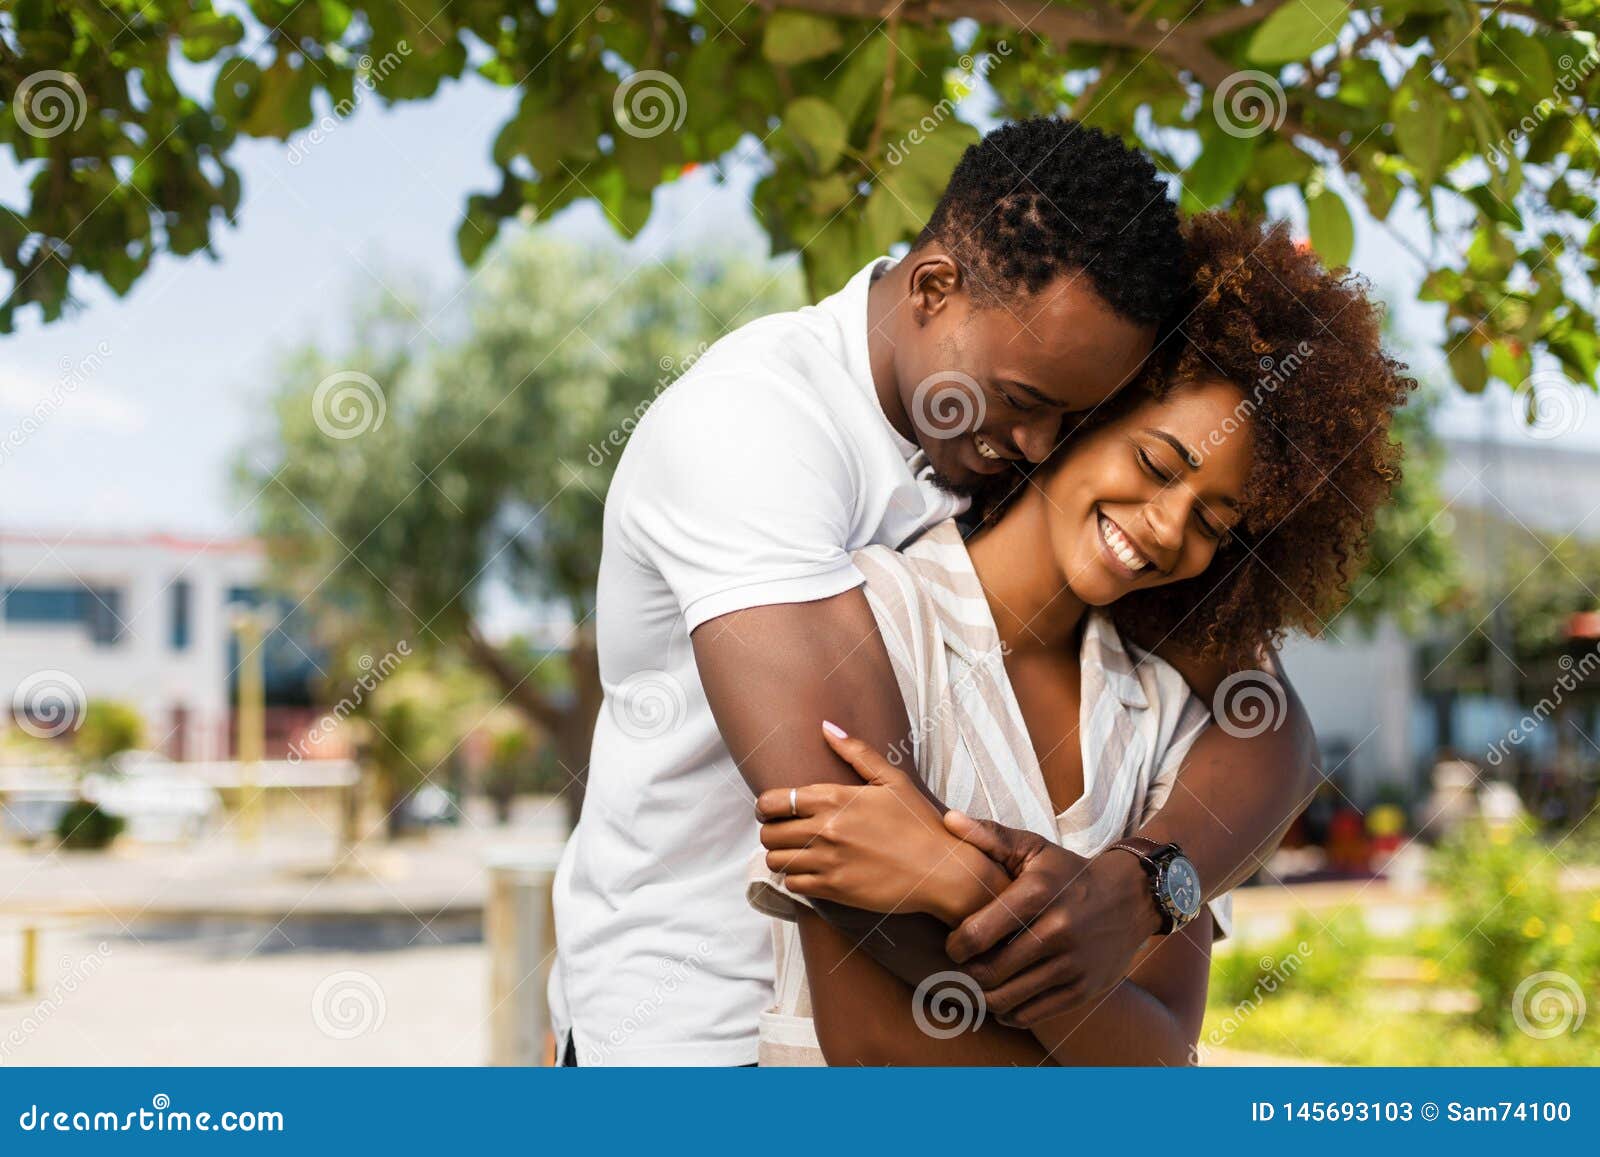 Outdoor Protrait Of African American Couple Embracing Each Other Stock Image Image Of Hands